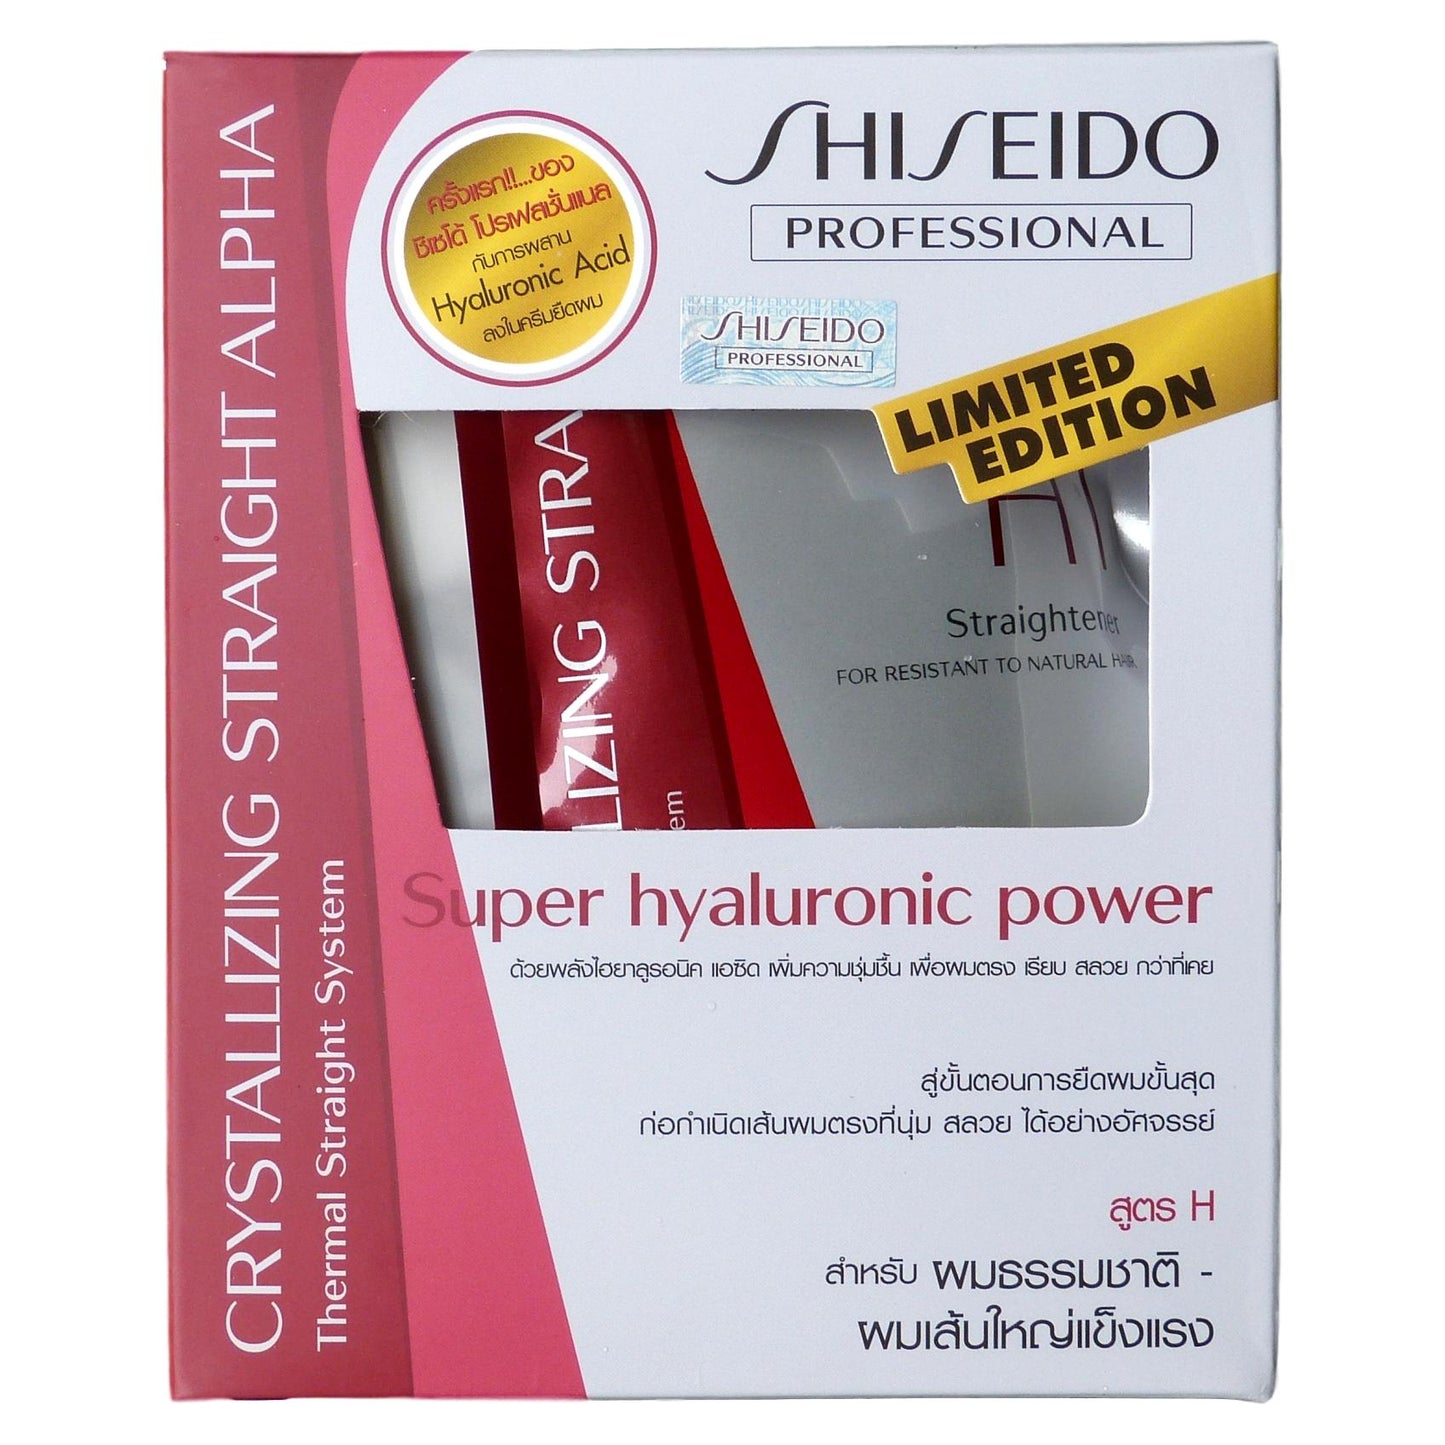 Shiseido Crystallizing Straight Hair Straightener for Resistant to Natural Hair - Asian Beauty Supply